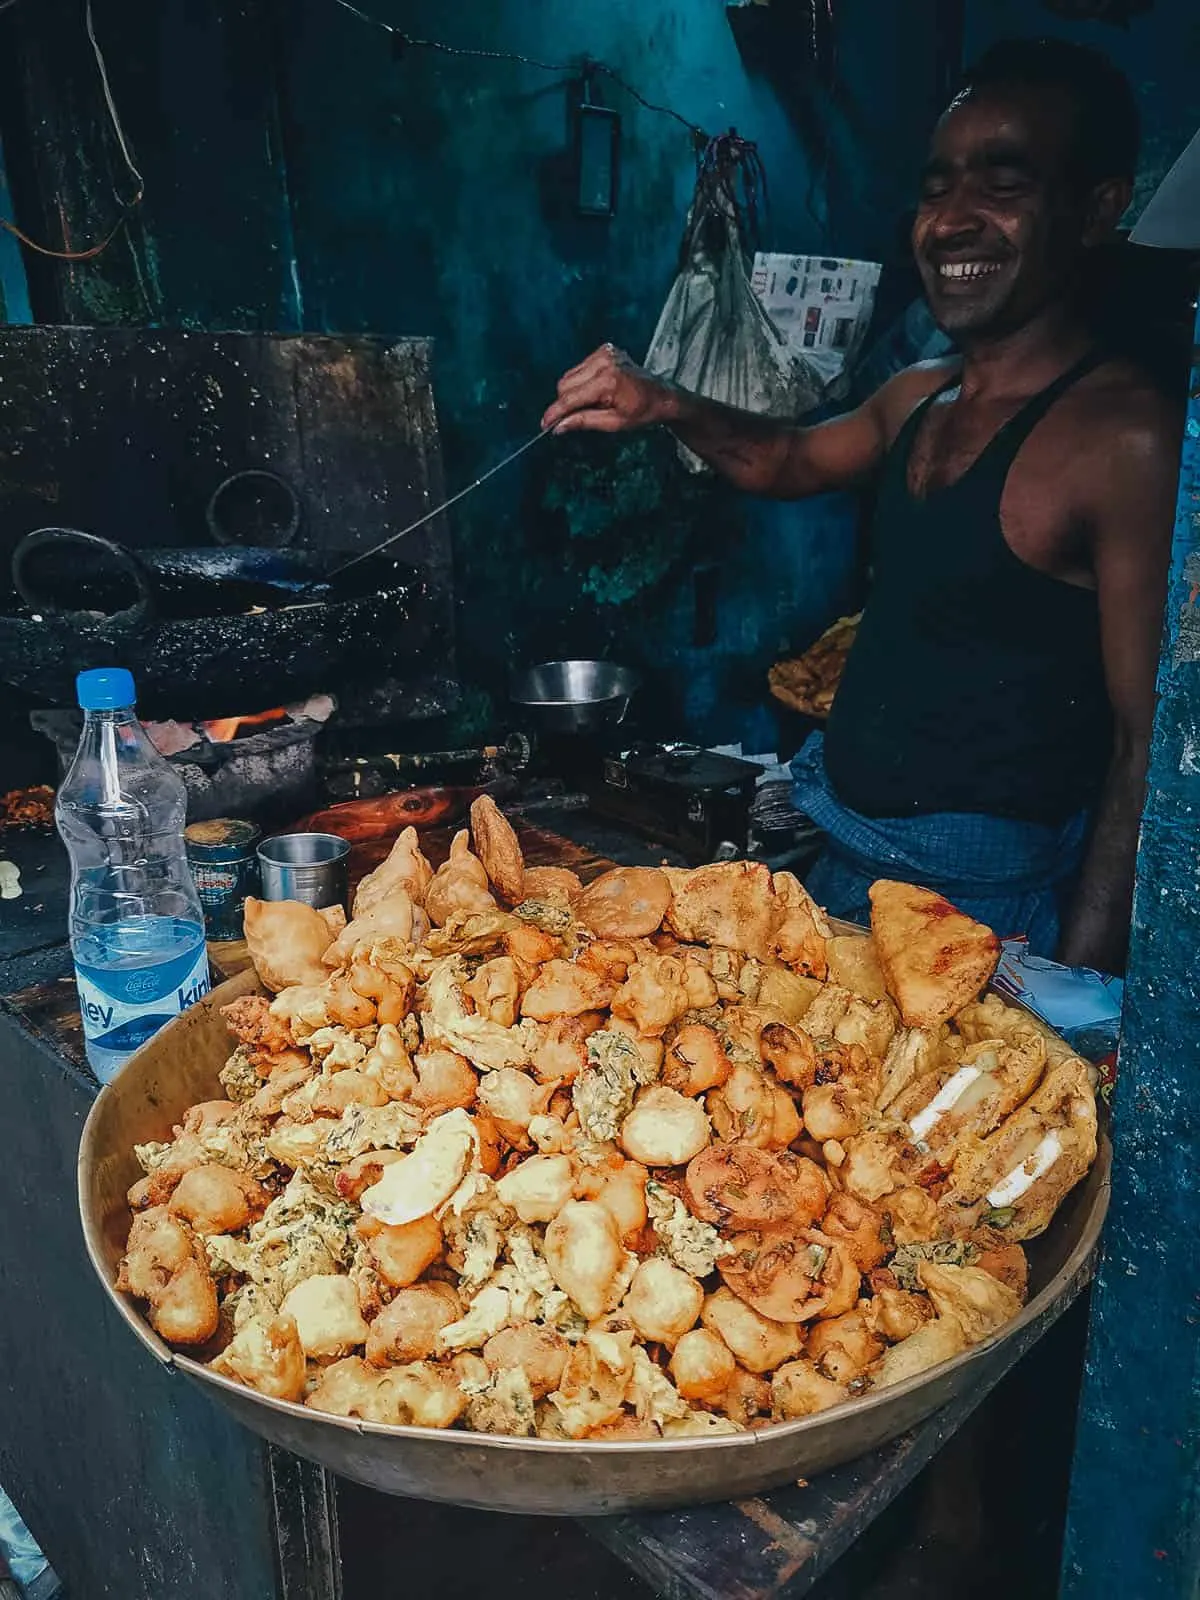 Indian man selling pakoras made with green chilies, onions, potatoes, paneer, etc